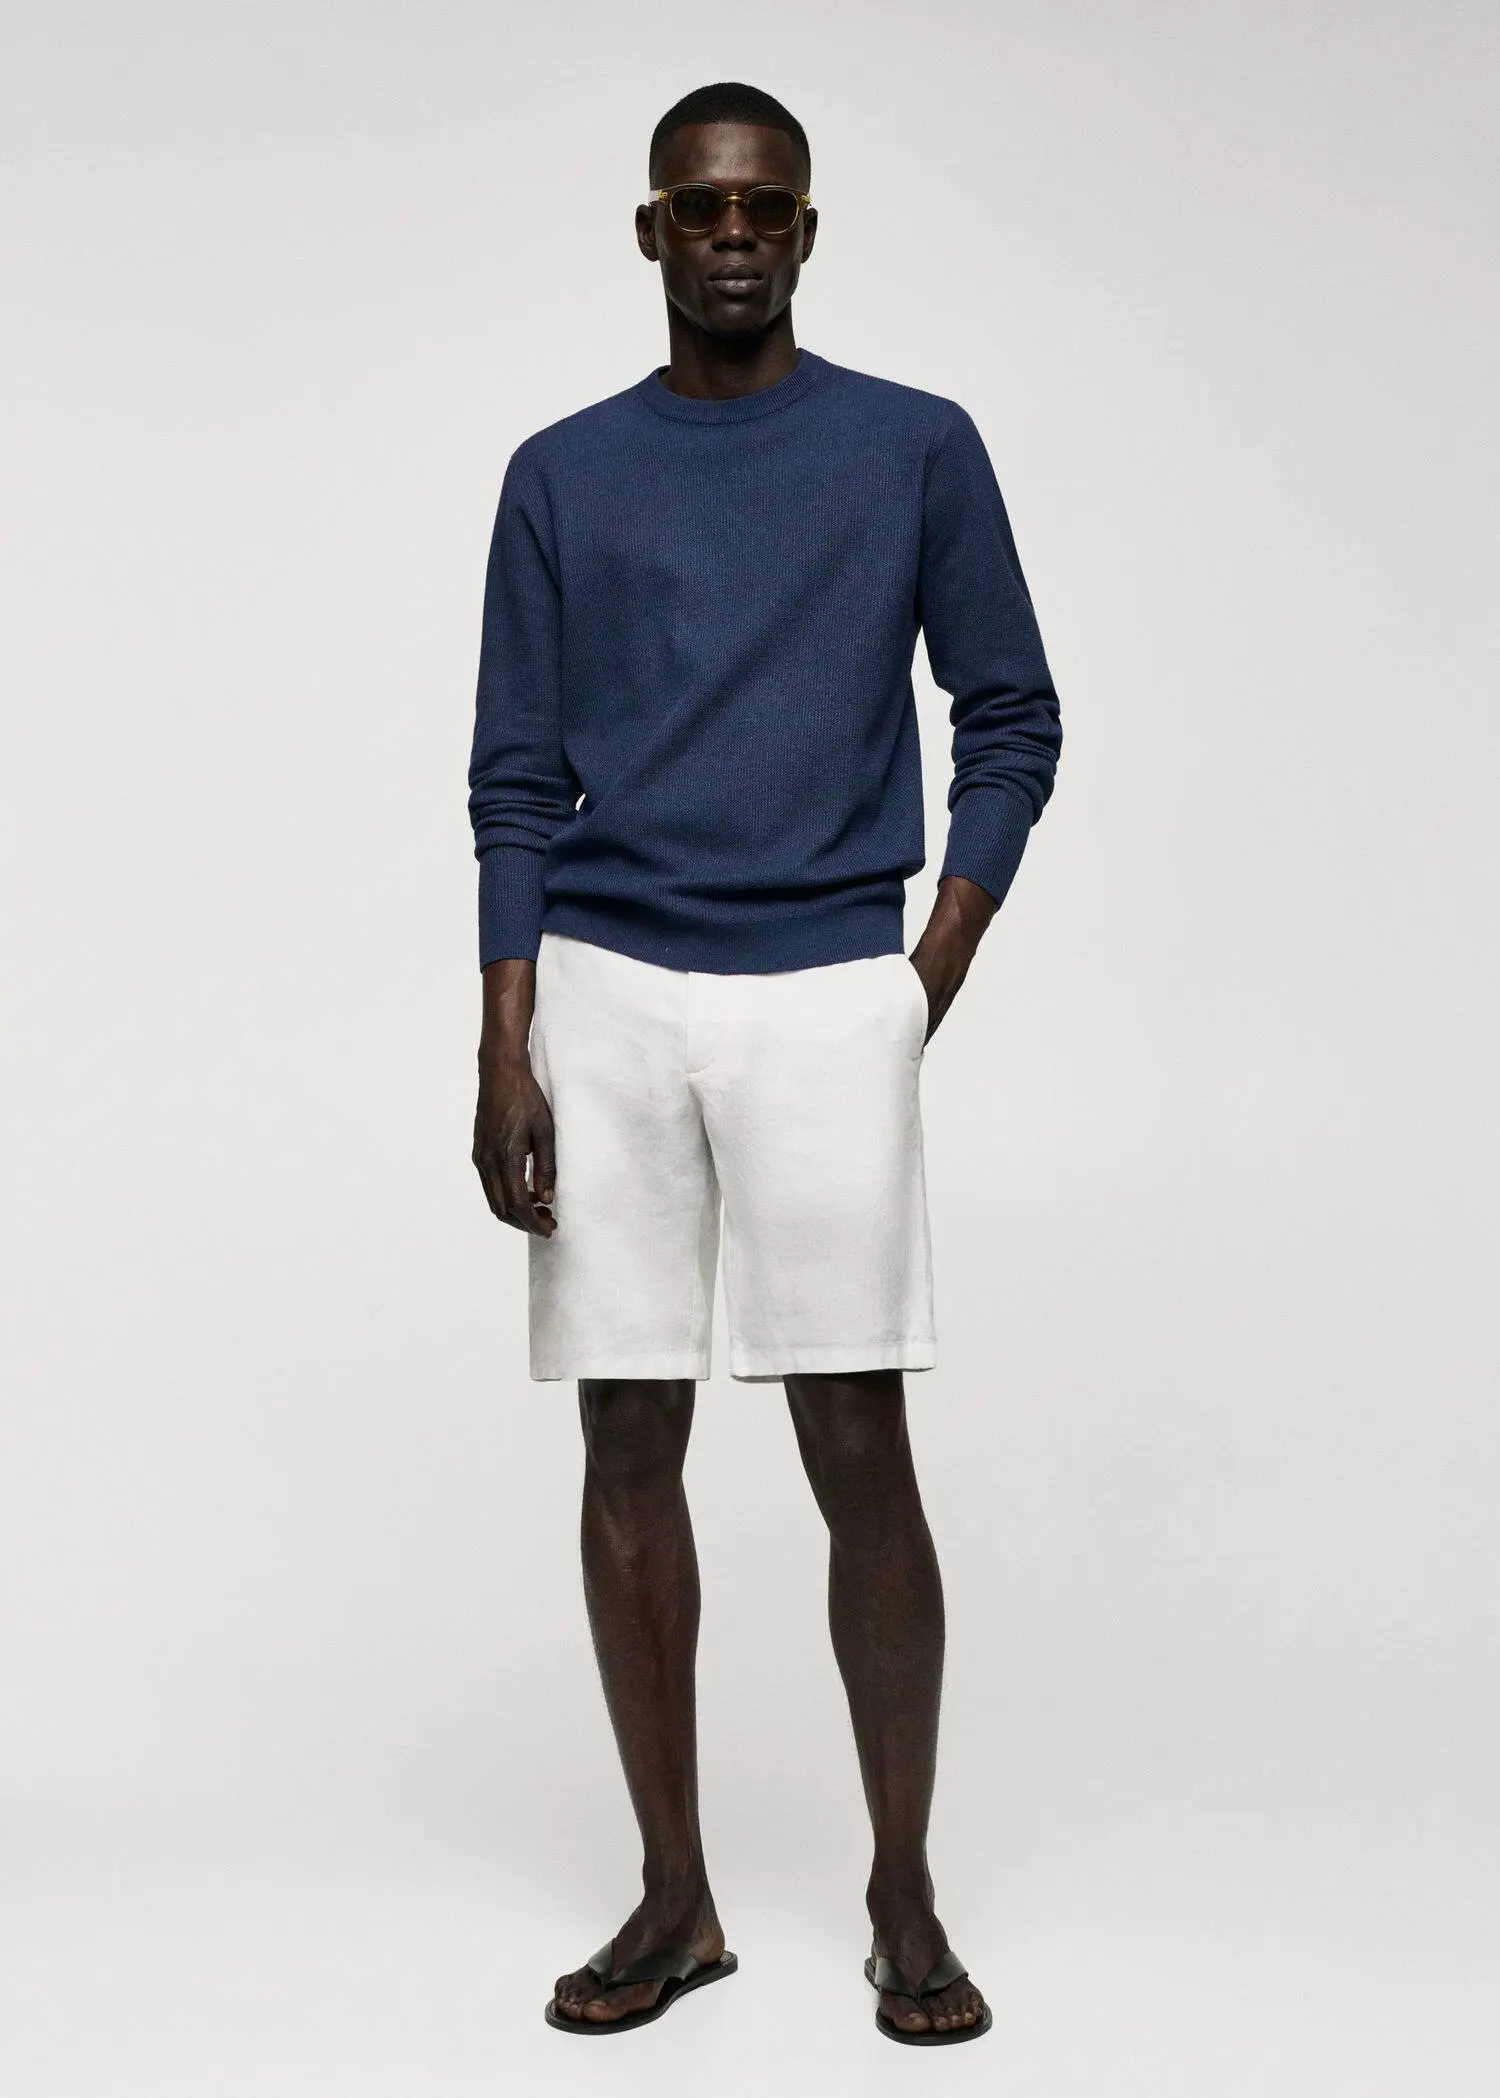 Mango Structured cotton sweater. a man in a blue sweater and white shorts. 